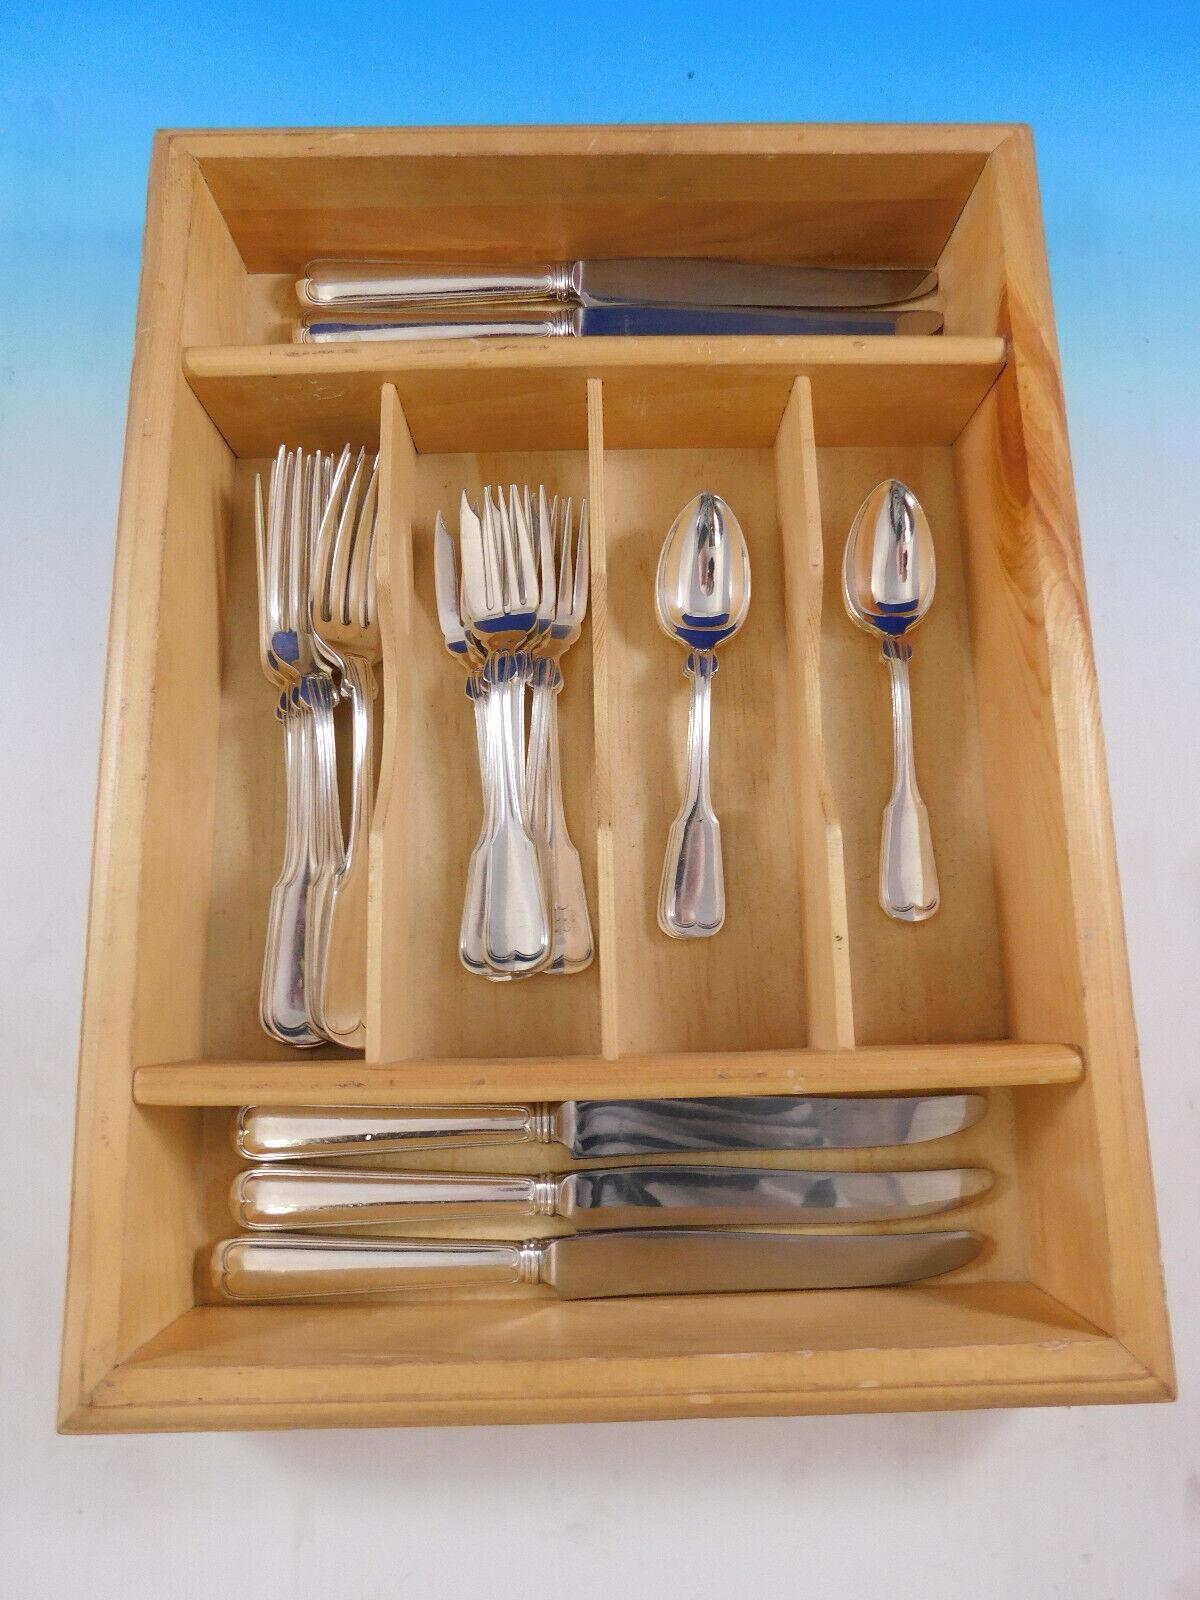 Dinner size Threaded antique by Gorham sterling silver flatware, 24 pieces. This set includes:

6 dinner size knives, 9 3/4